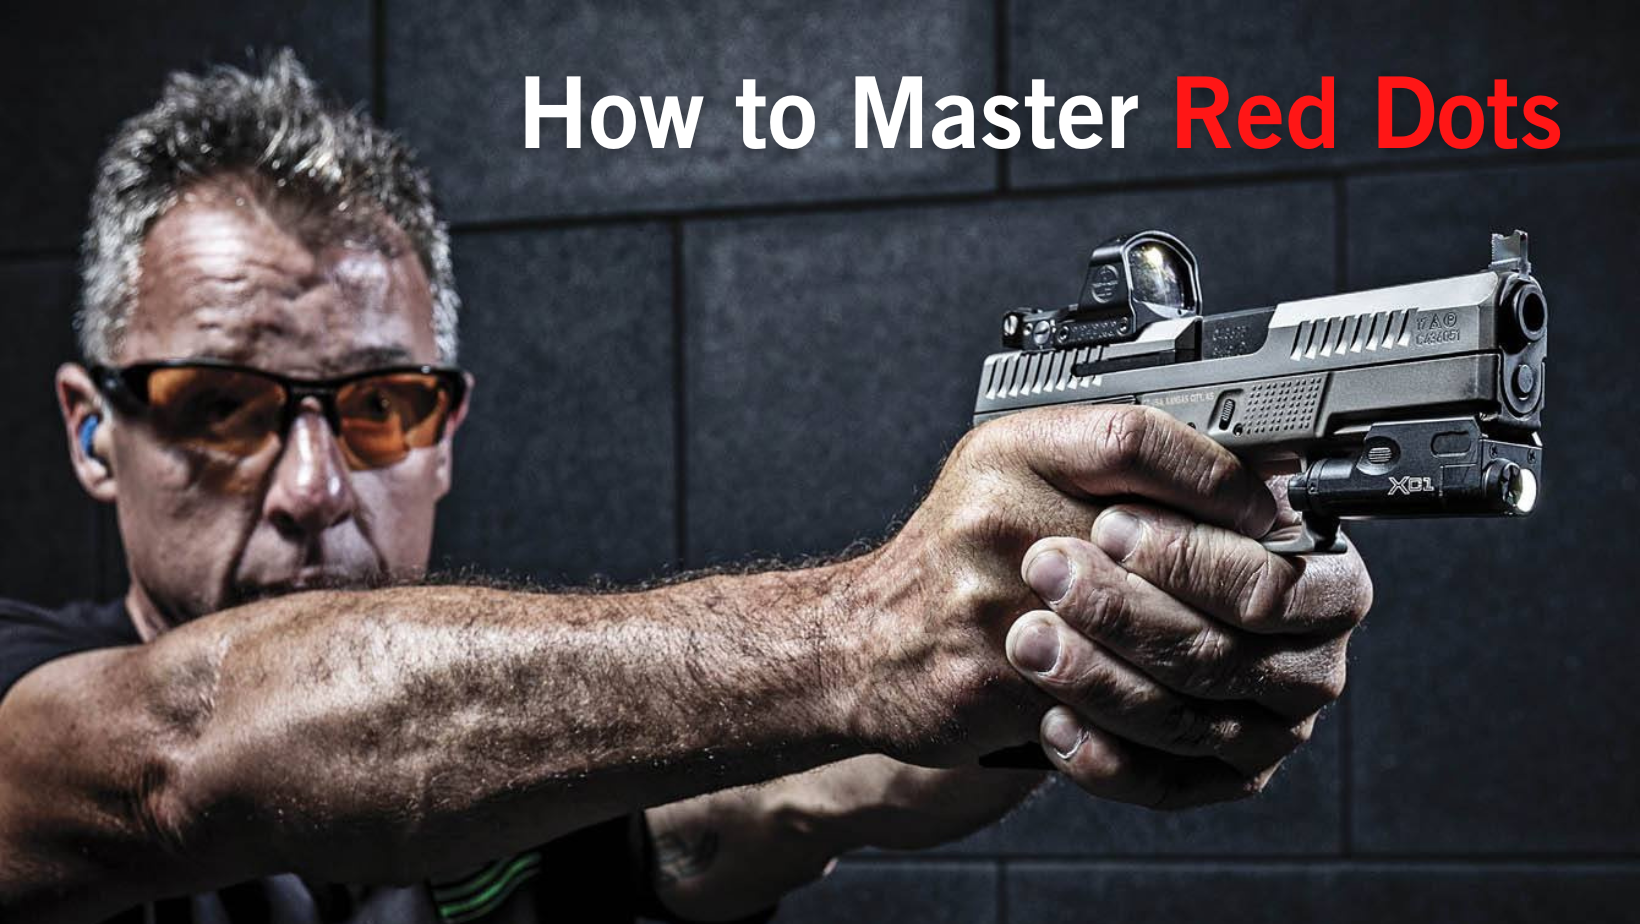 Challenge Your Reflex With The Ultimate Red Hands